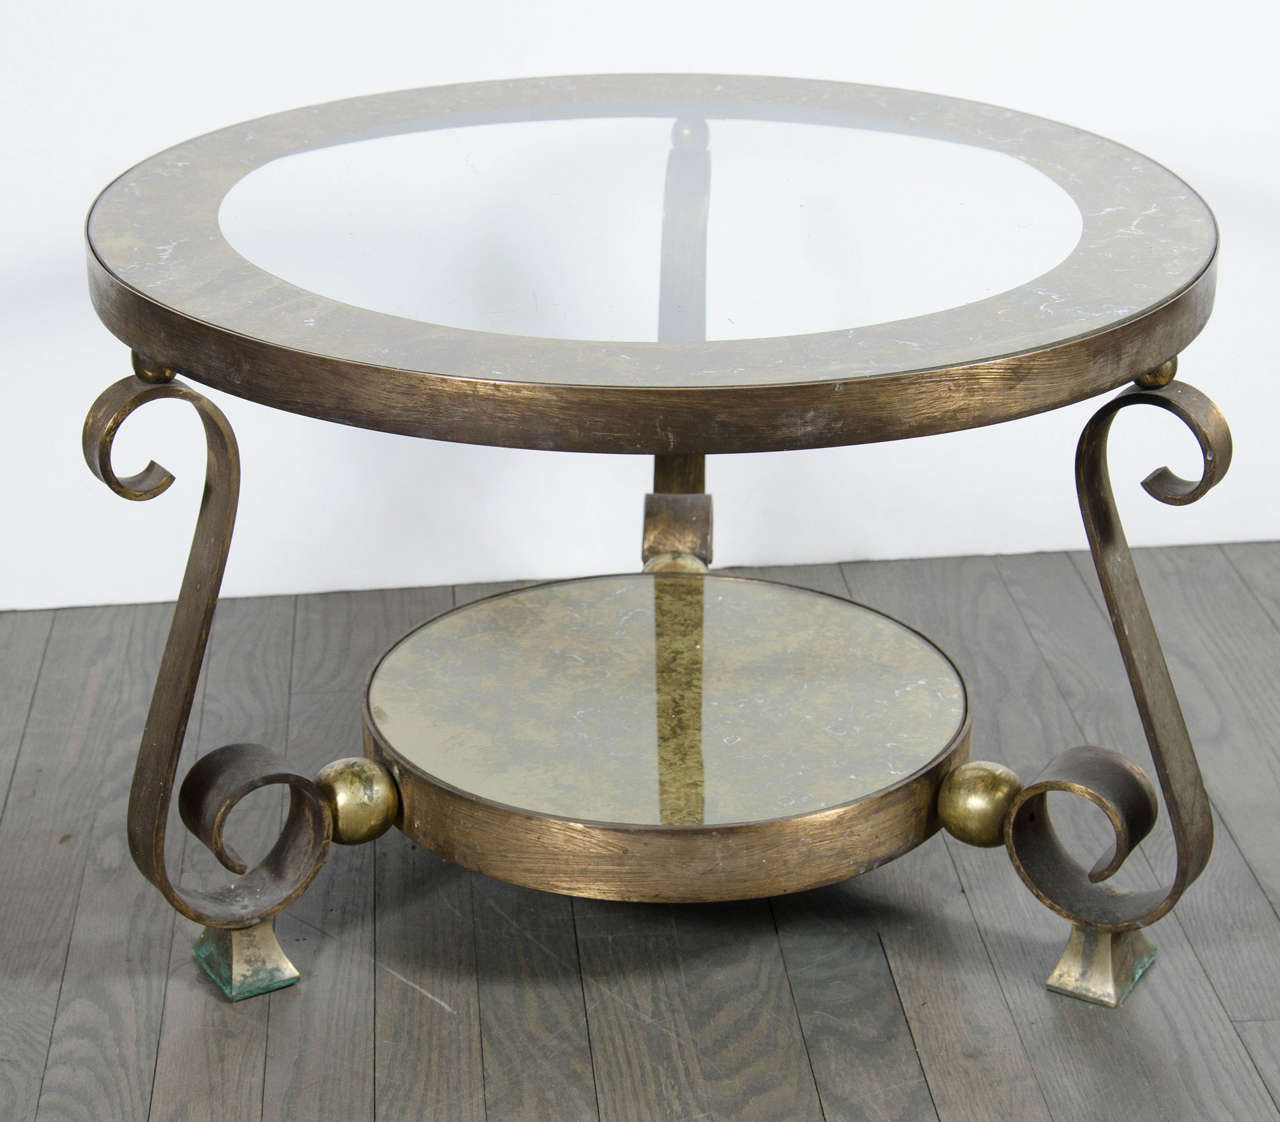 This gorgeous  occasional table by Arturo Pani is an exceptional piece. This table is designed in patined bronze, brass, and has gorgeous reverse eglomise detailing in a bronze and gold finish. The legs feature a stylized scroll form design  with